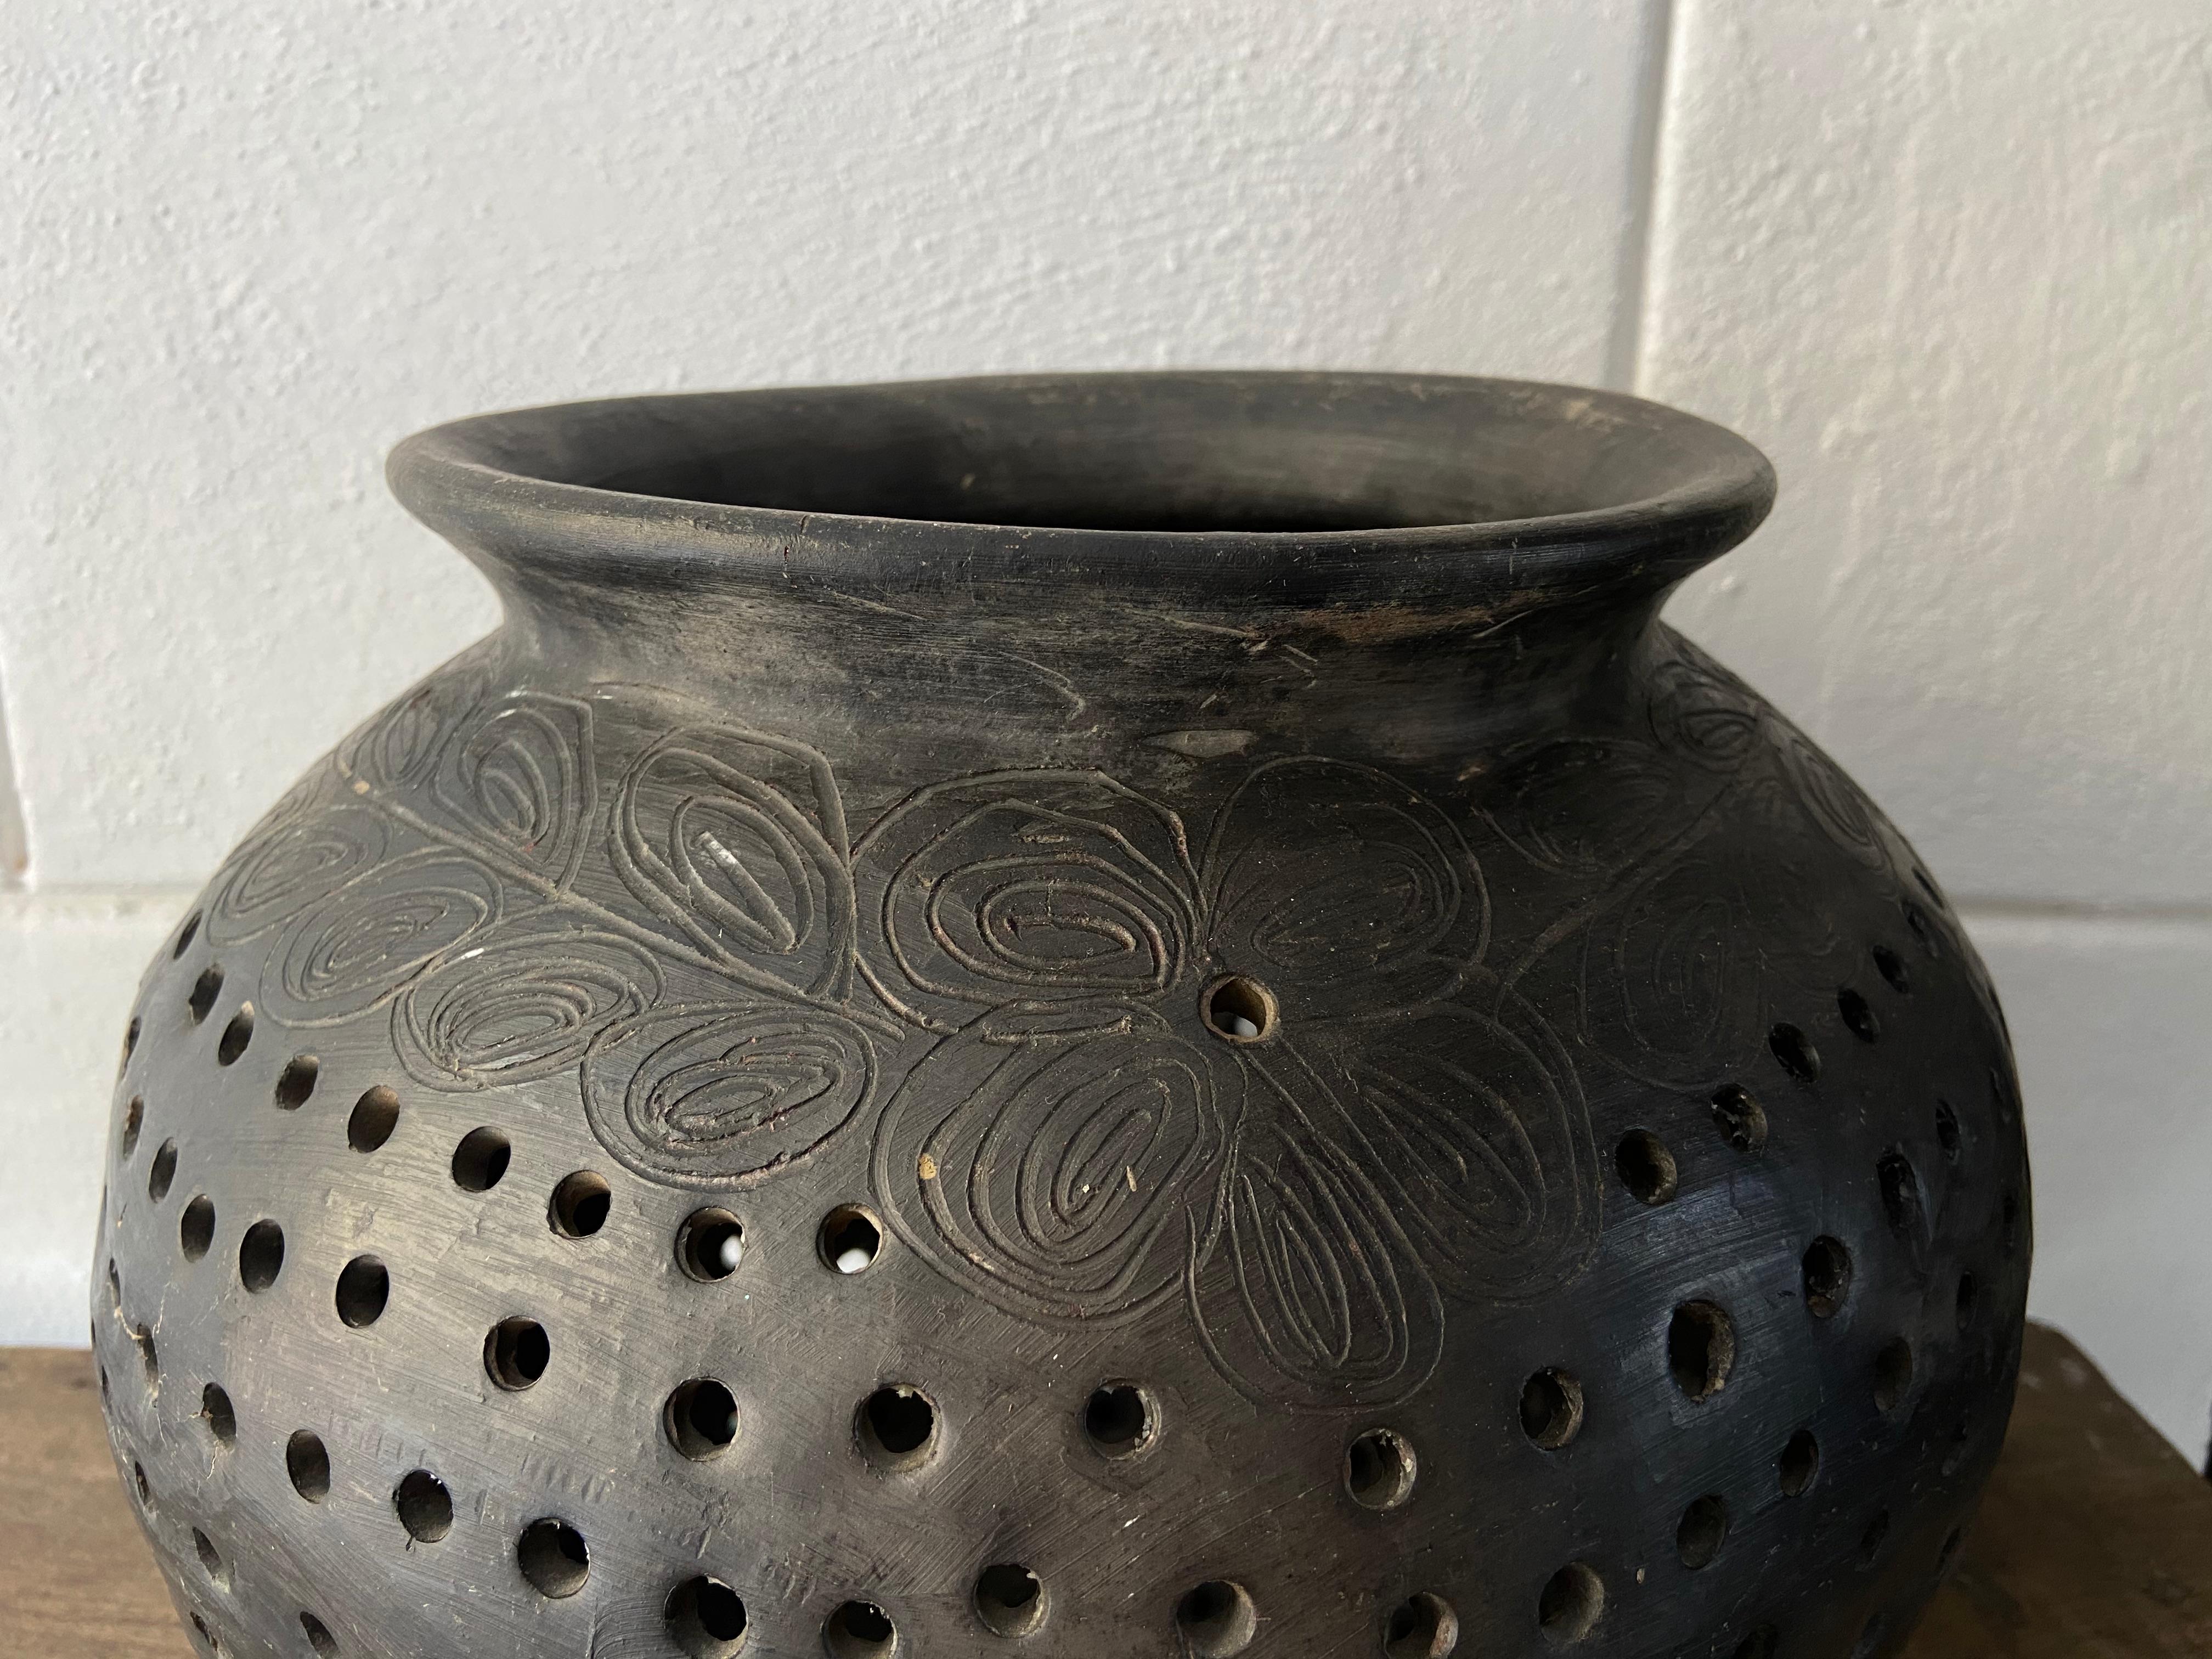 Black clay ceramic maize and bean pot rinser with engraved flowers from Mexico. Typical pottery from San Bartolo Coyotepec, Oaxaca, 1950's era.